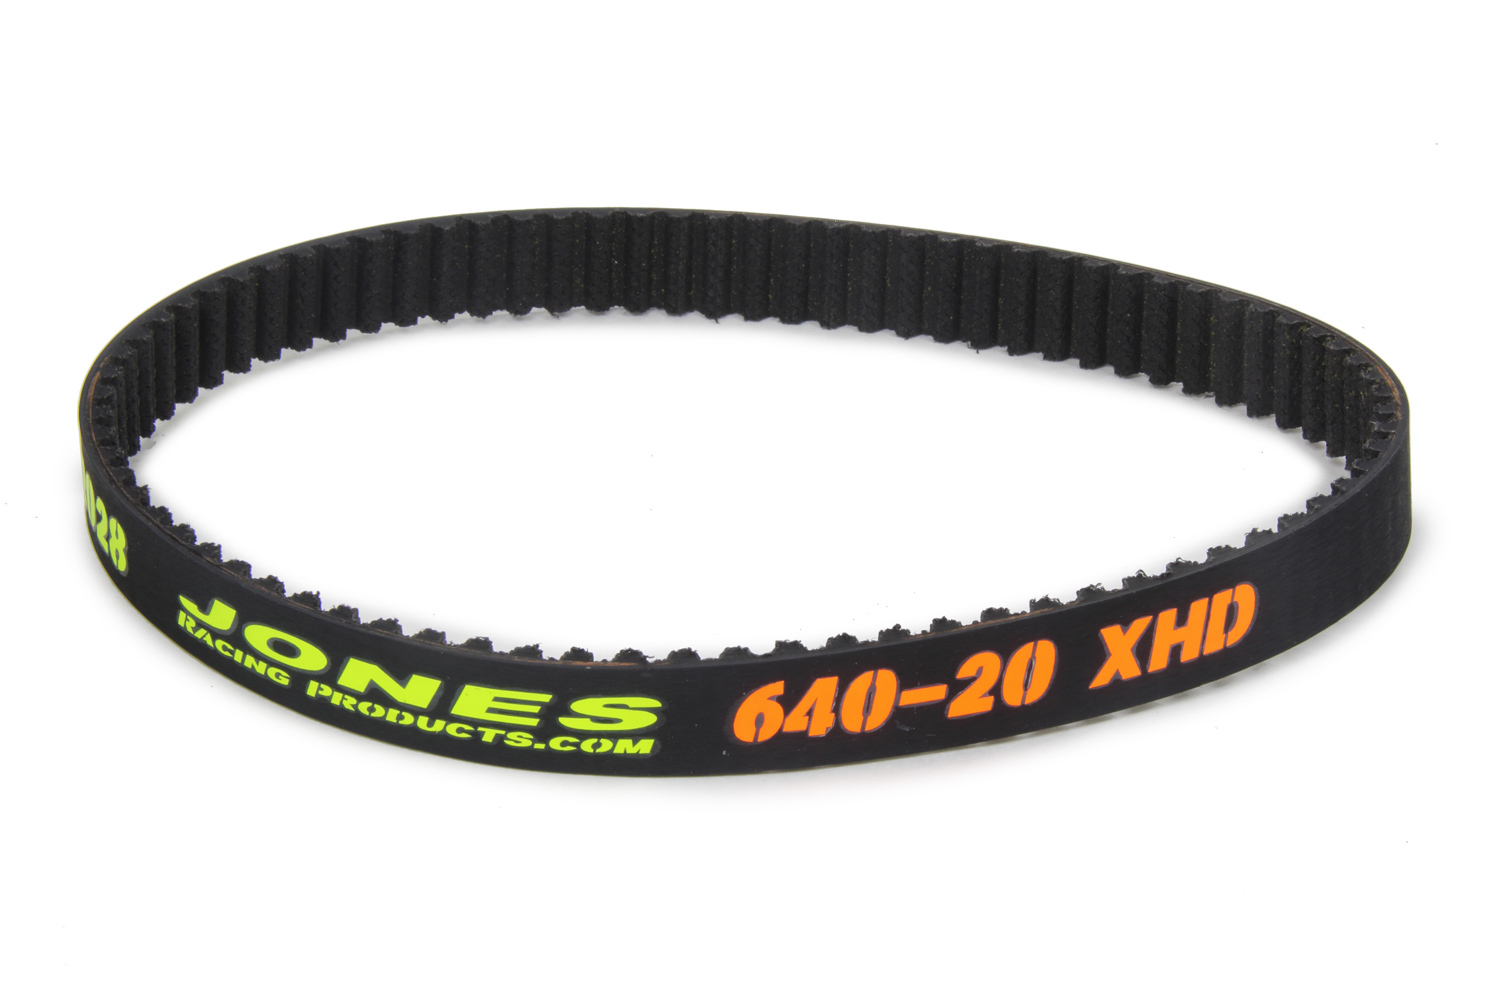 Jones Racing Products 640-20-XHD HTD Drive Belt, 25.197 in Long, 20 mm Wide, 8 mm Pitch, Each